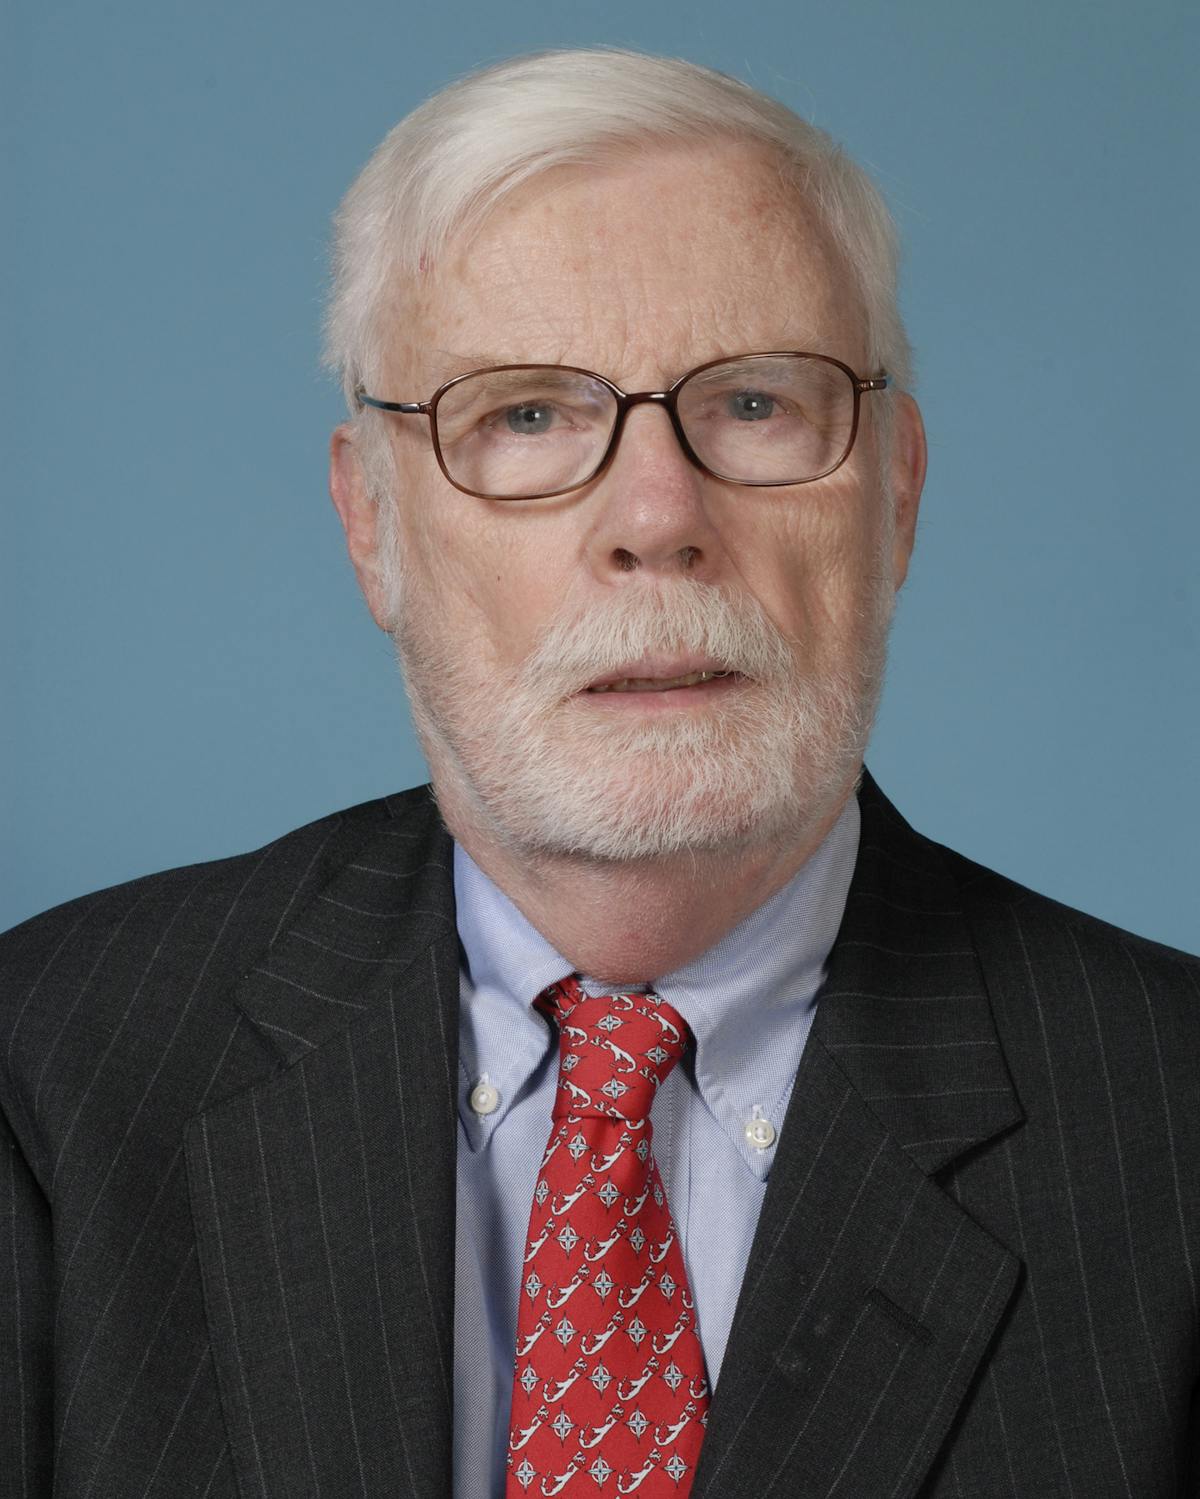 Transit industry veteran Mortimer Downey was elected chair of the Metro Board of Directors in Washington, D.C.